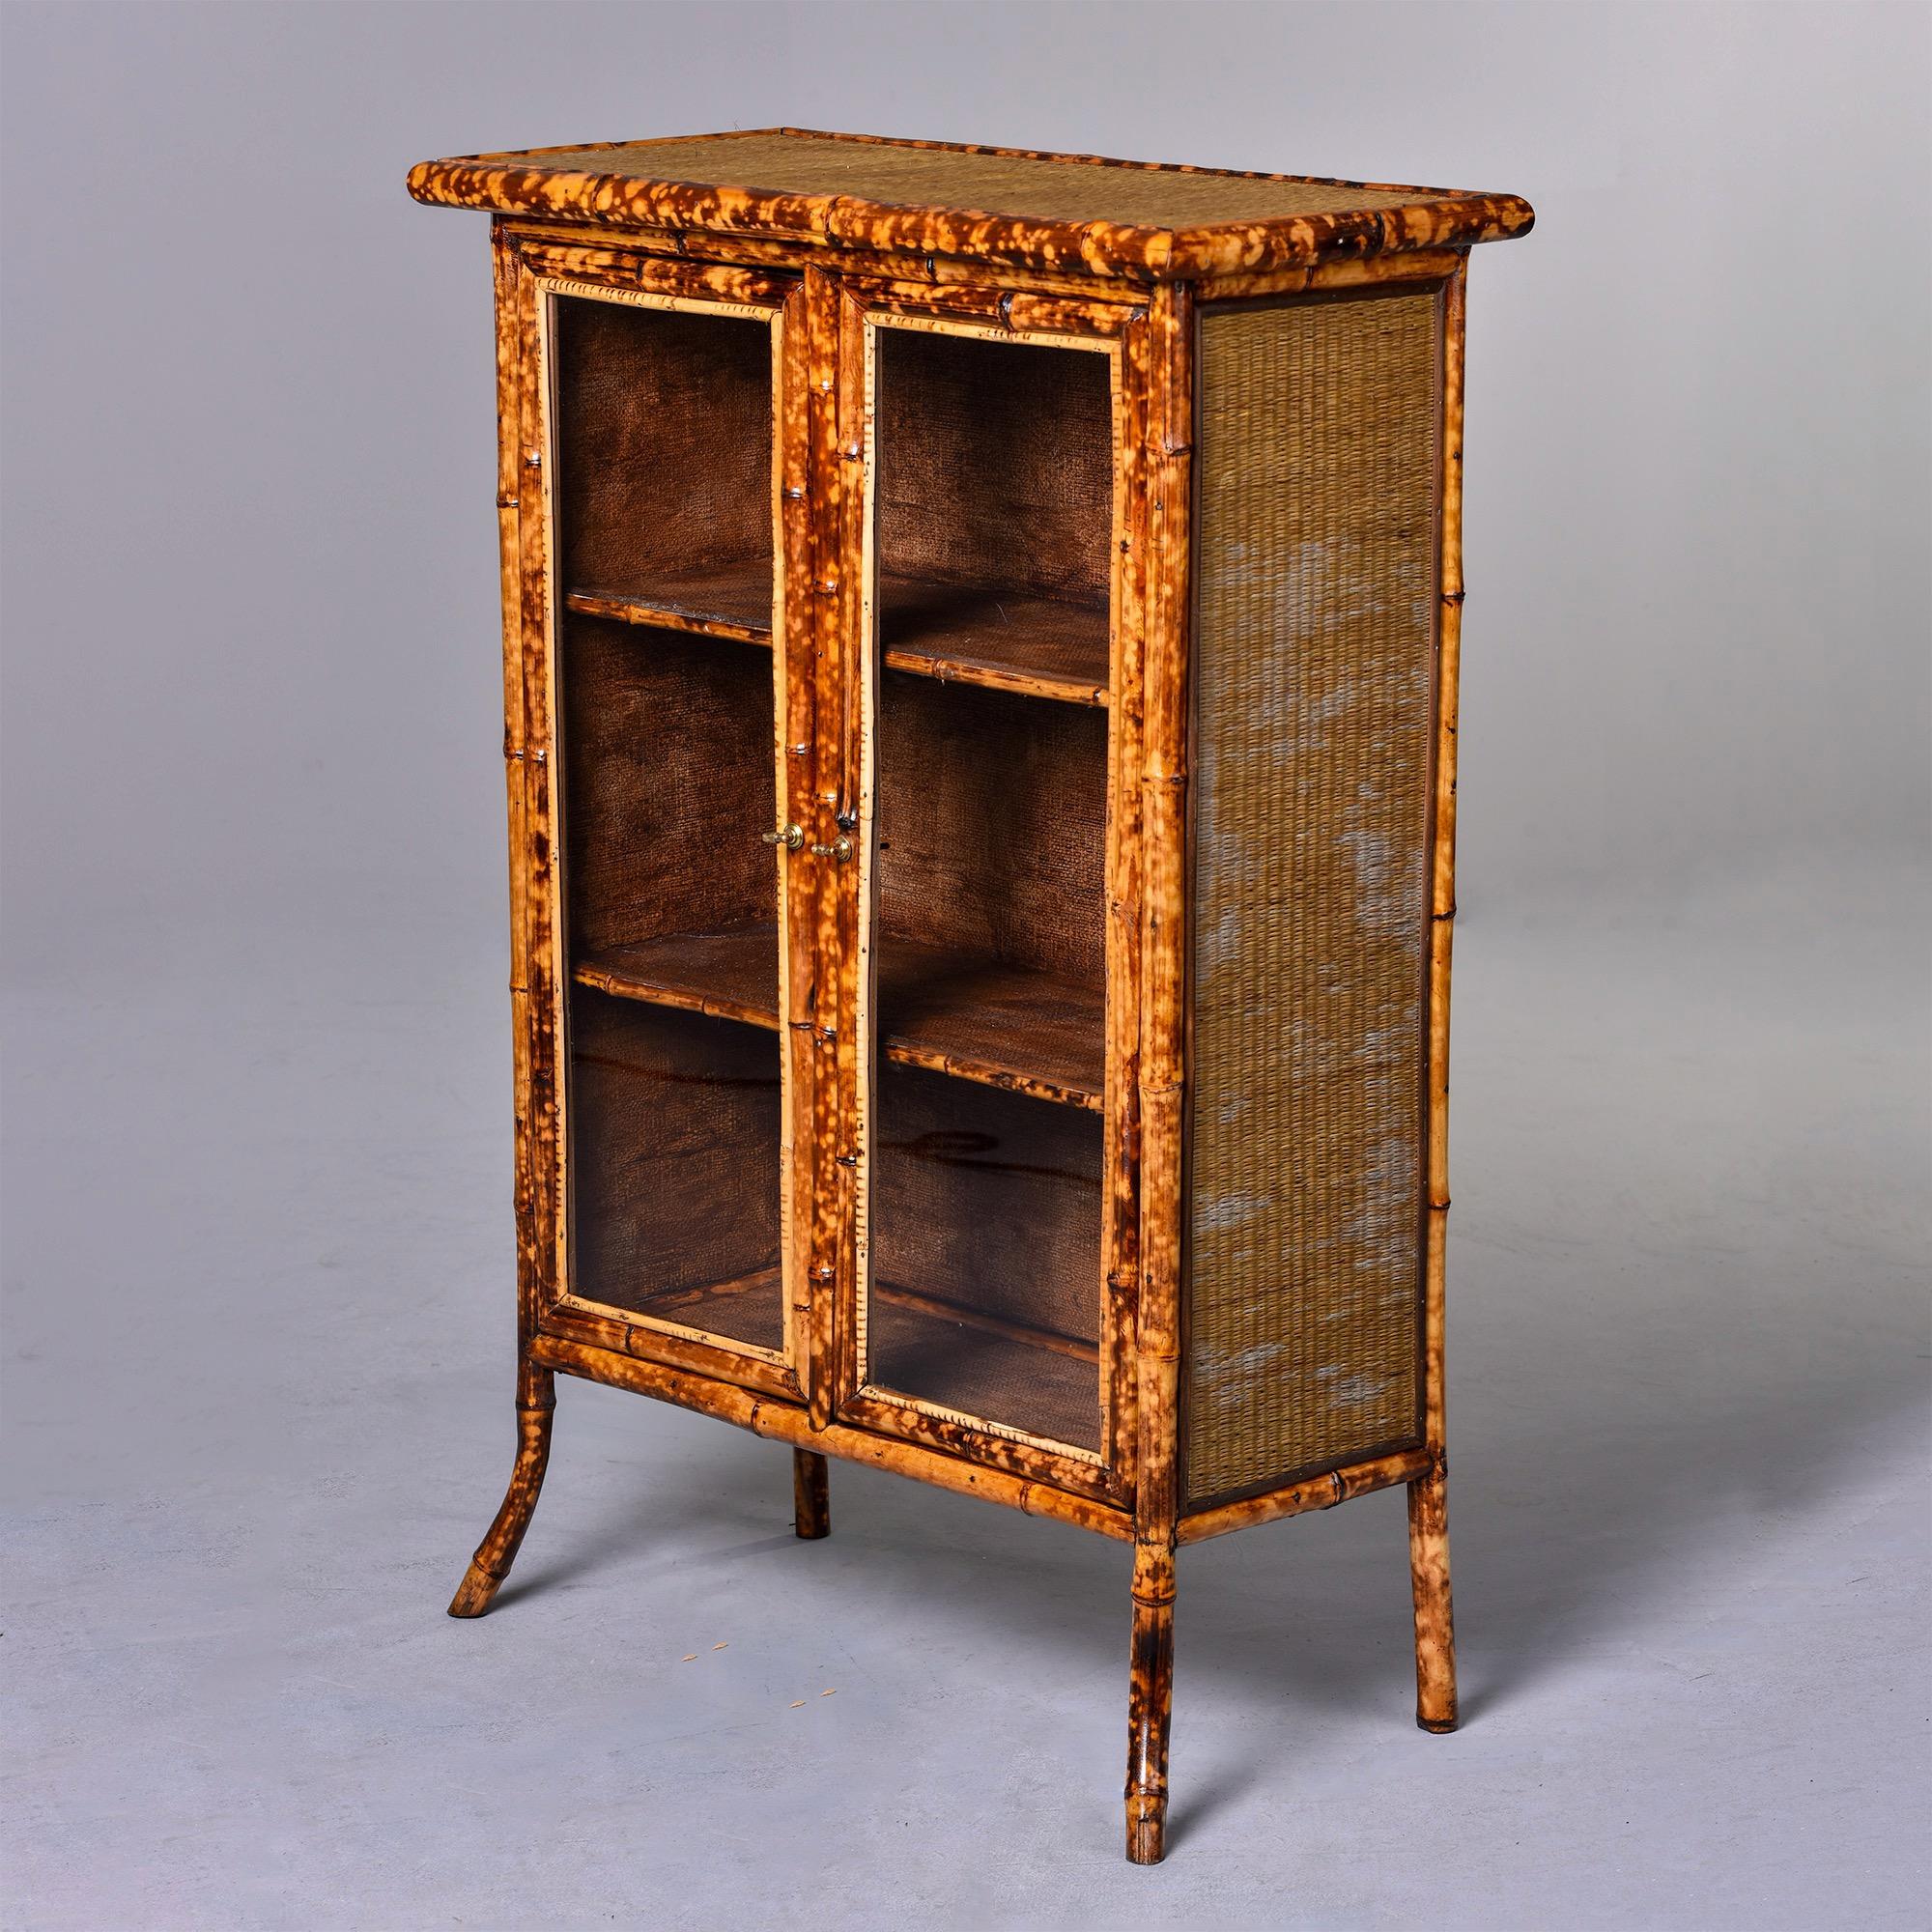 Circa 1930s two door spotted bamboo cabinet features glass fronts with woven grass cloth sides and top and two interior shelves. Unknown maker. Found in England.